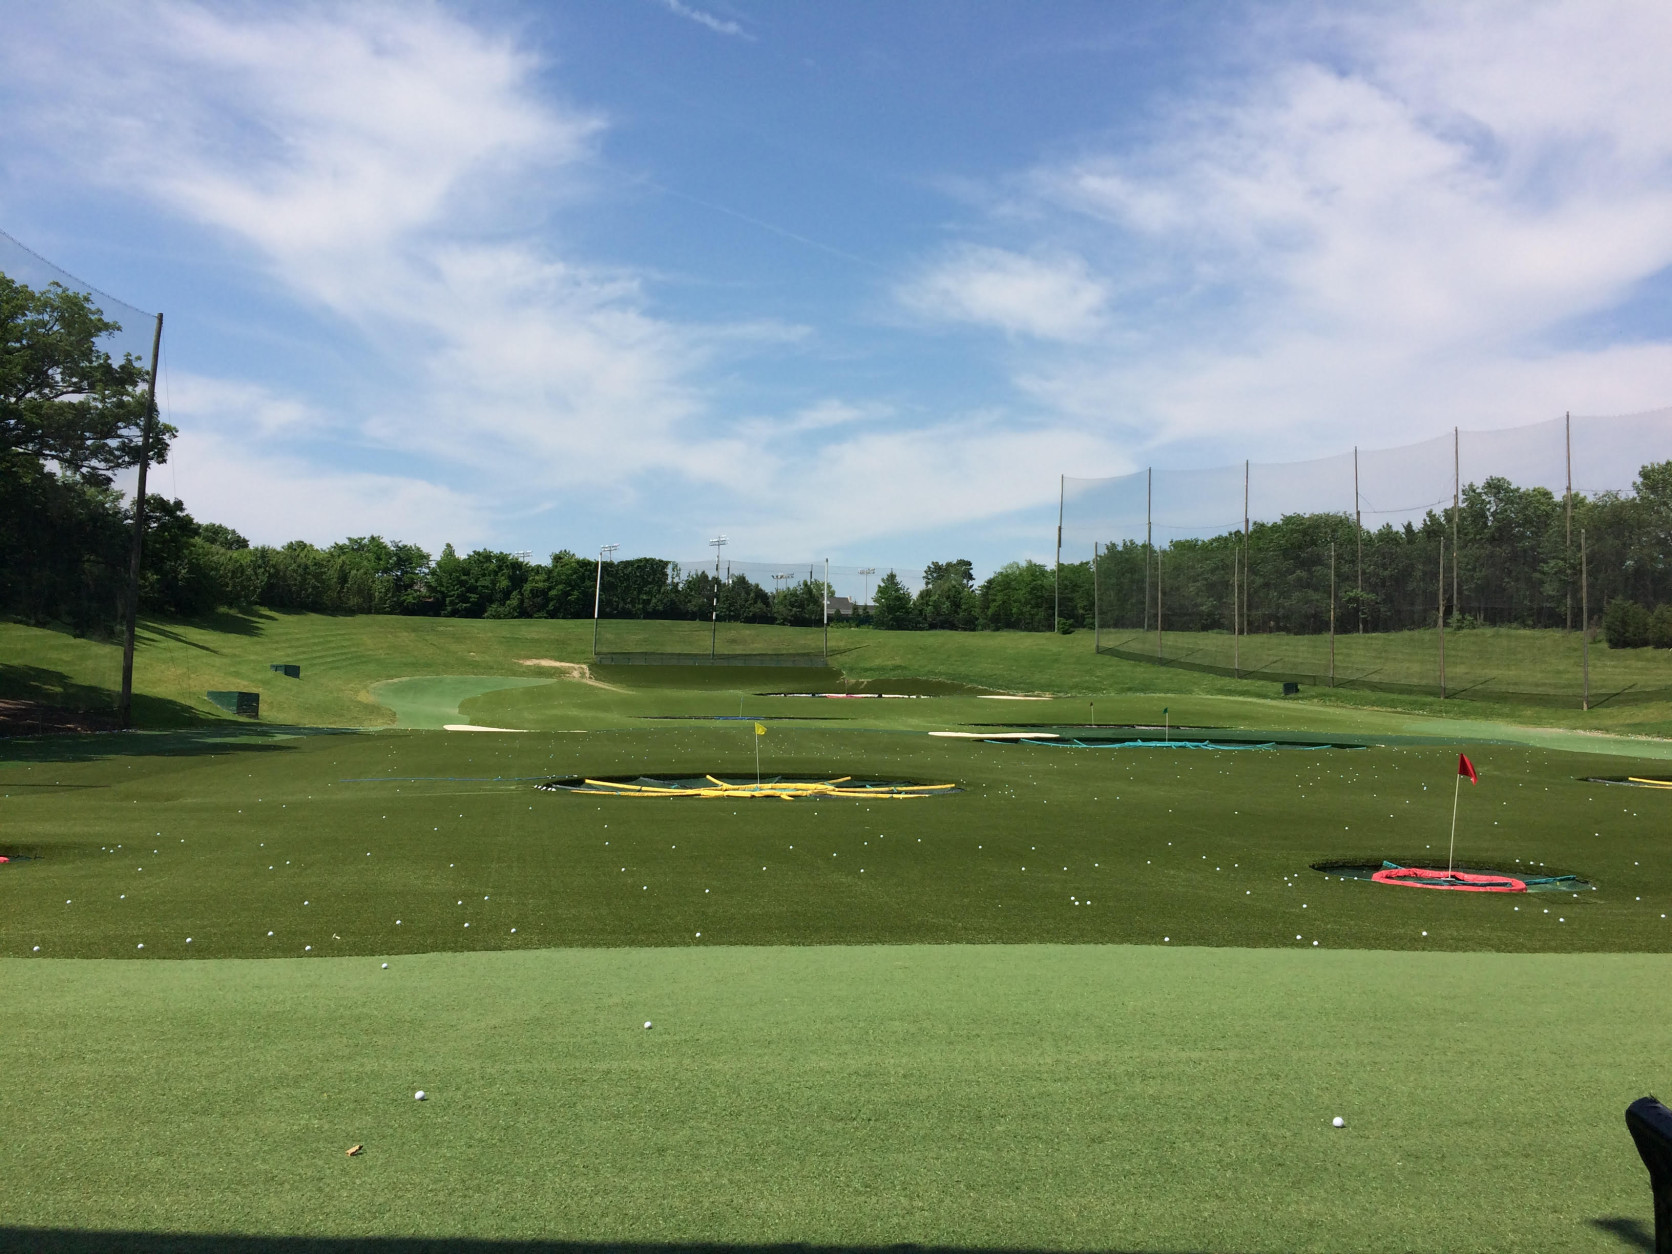 Topgolf recently renovated both the turf and the targets on its driving range, sinking a six-figure sum into improvements. (WTOP/Noah Frank)